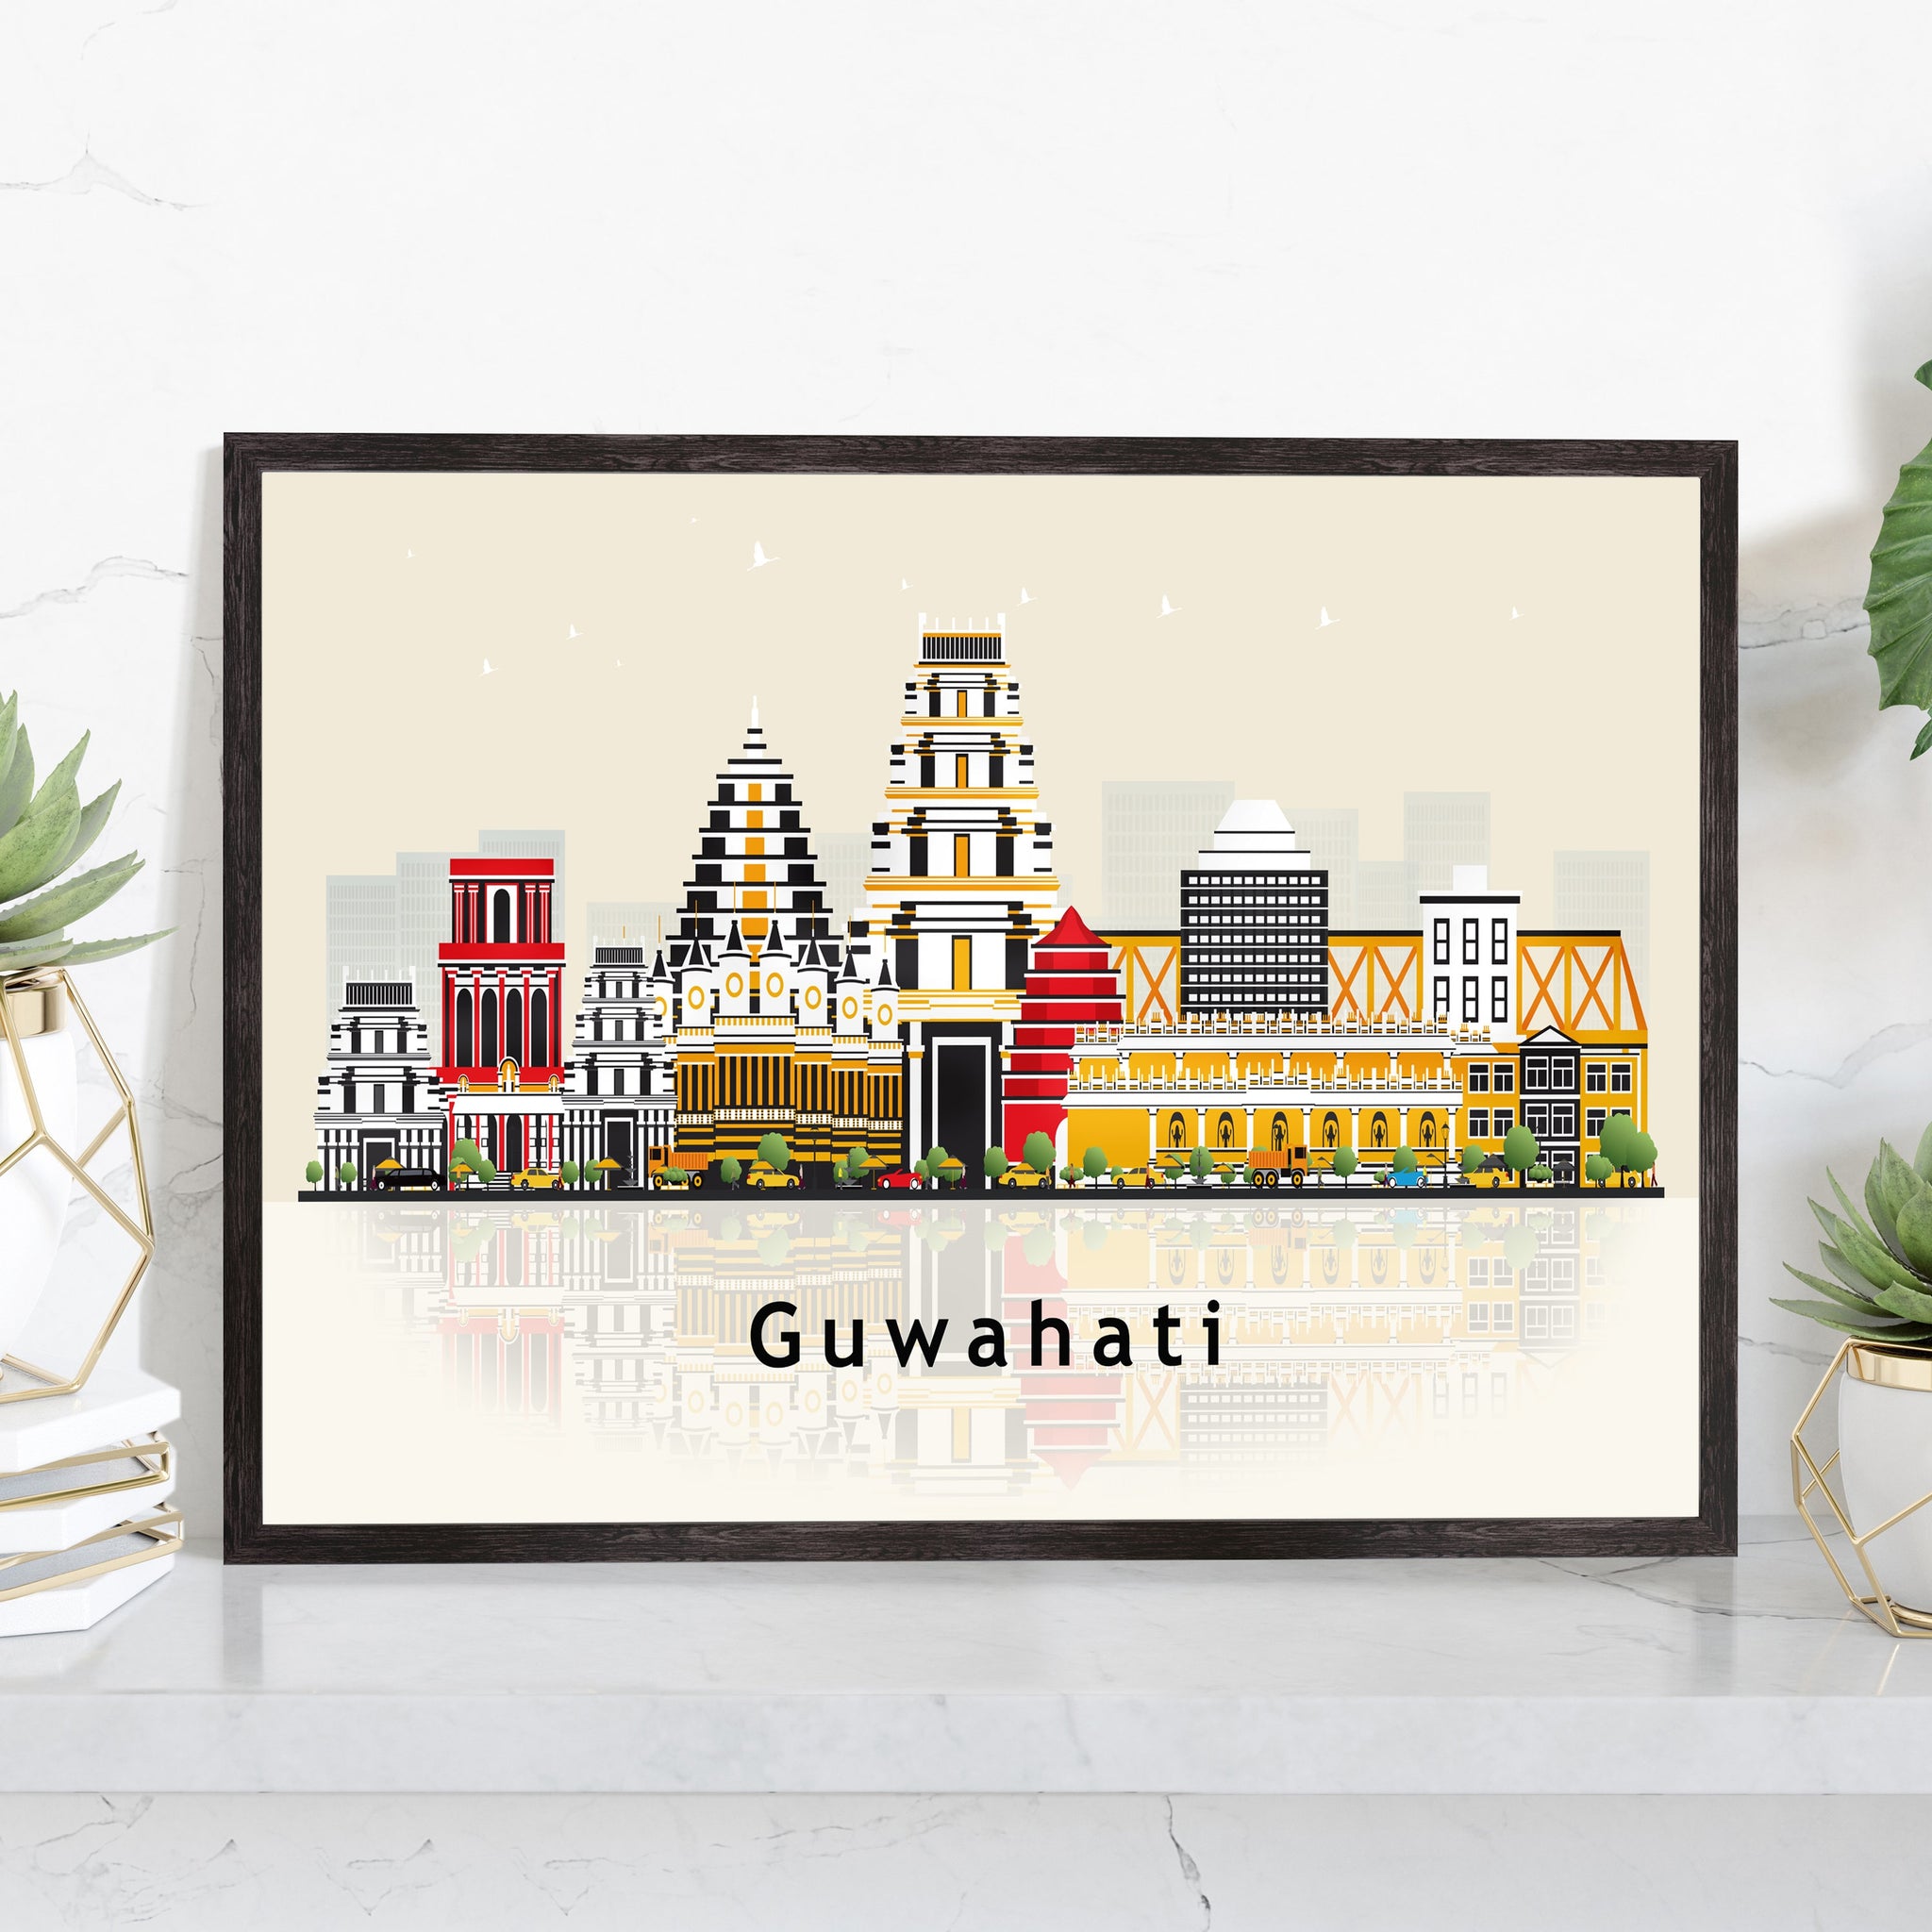 GUWAHATI INDIA Illustration skyline poster, Modern skyline cityscape poster, India city skyline landmark map poster, Home wall decoration